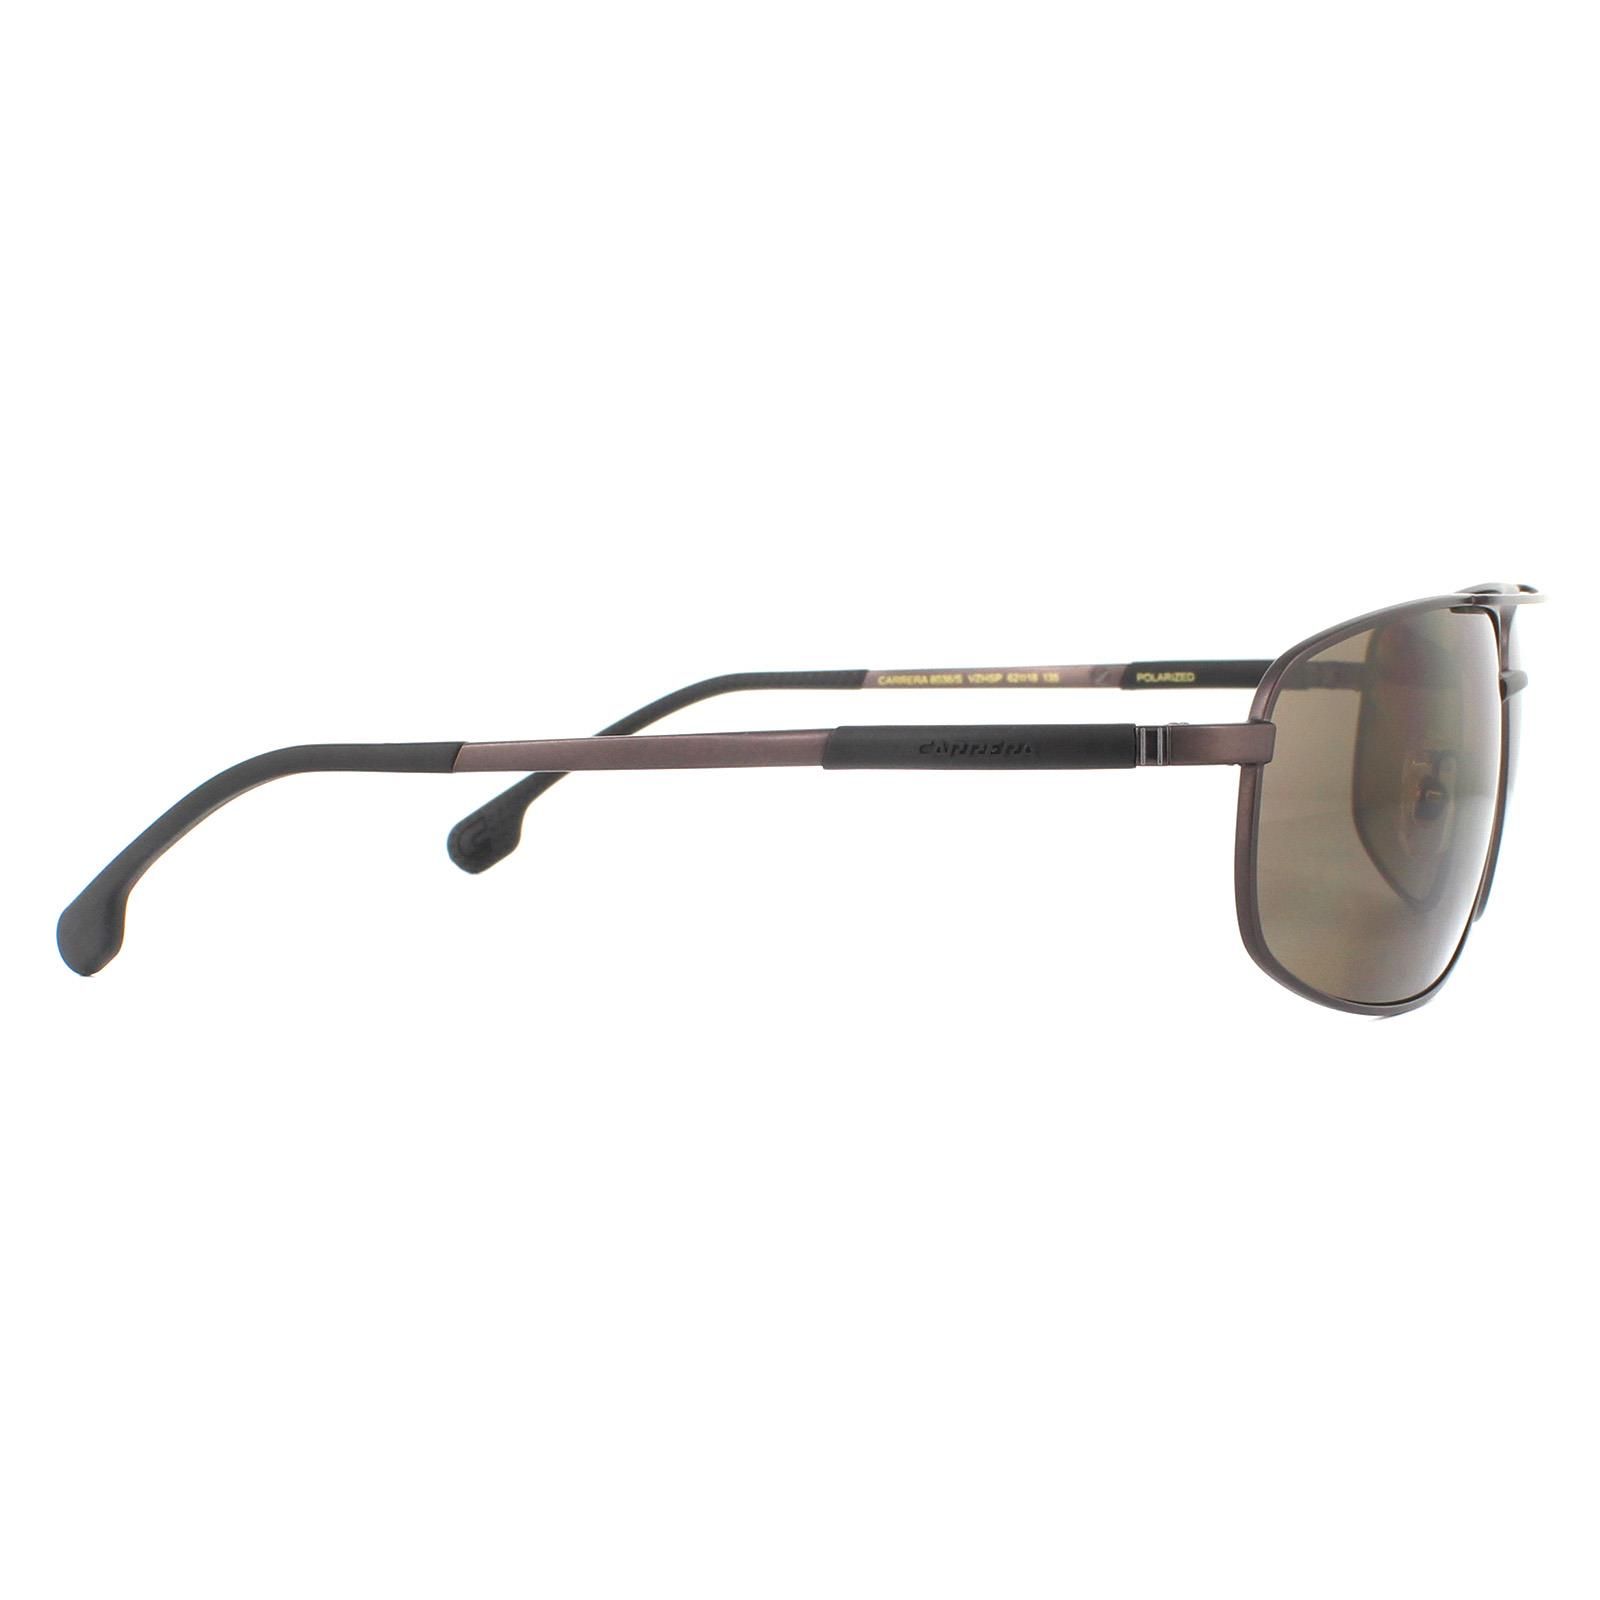 Carrera Sunglasses 8036/S VZH SP Matte Bronze Bronze Polarized are a wrap style made from metal with a double bridge, Carrera logos on the temples and rubberised inserts on the temple tips for comfort.